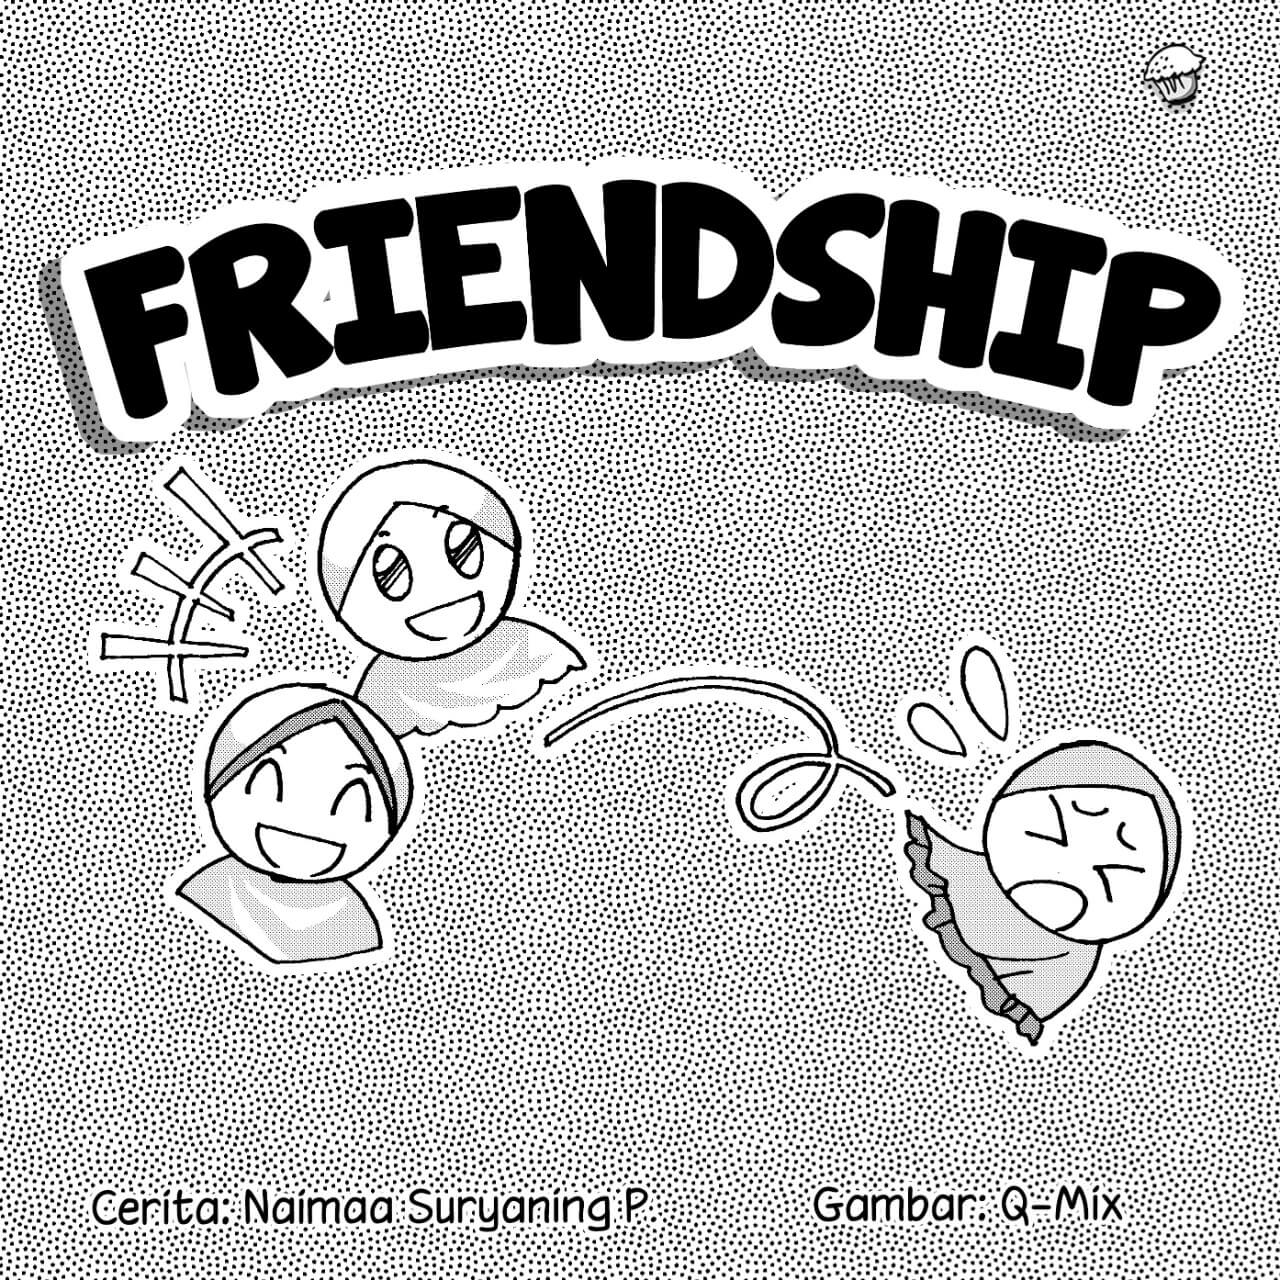 friendship cover bw